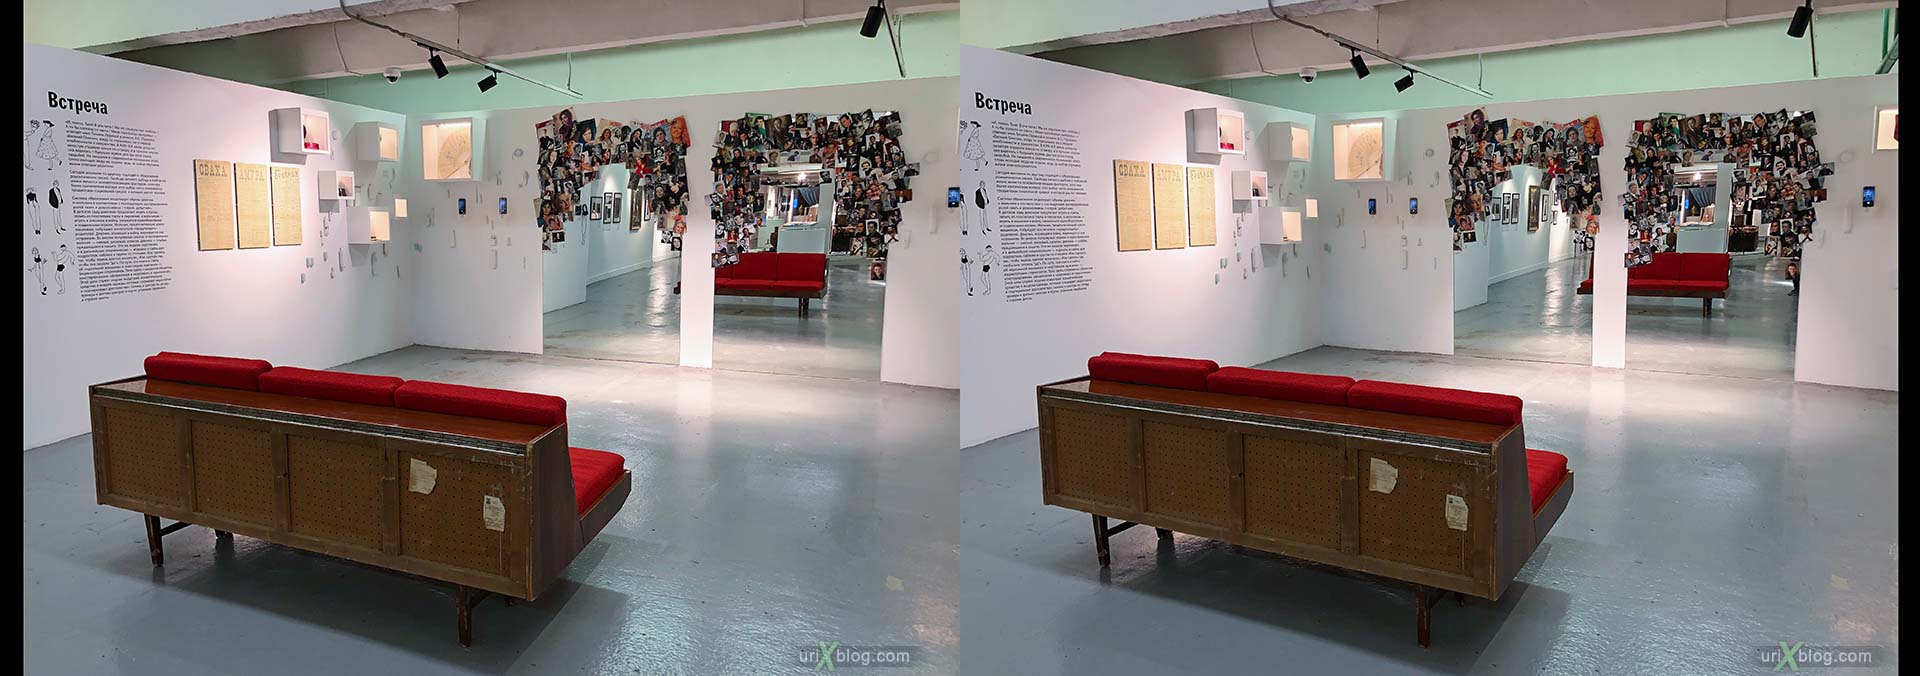 exhibition, Family values, Museum of Moscow, soviet life, apartment, toys, Moscow, Russia, 3D, stereo pair, cross-eyed, crossview, cross view stereo pair, stereoscopic